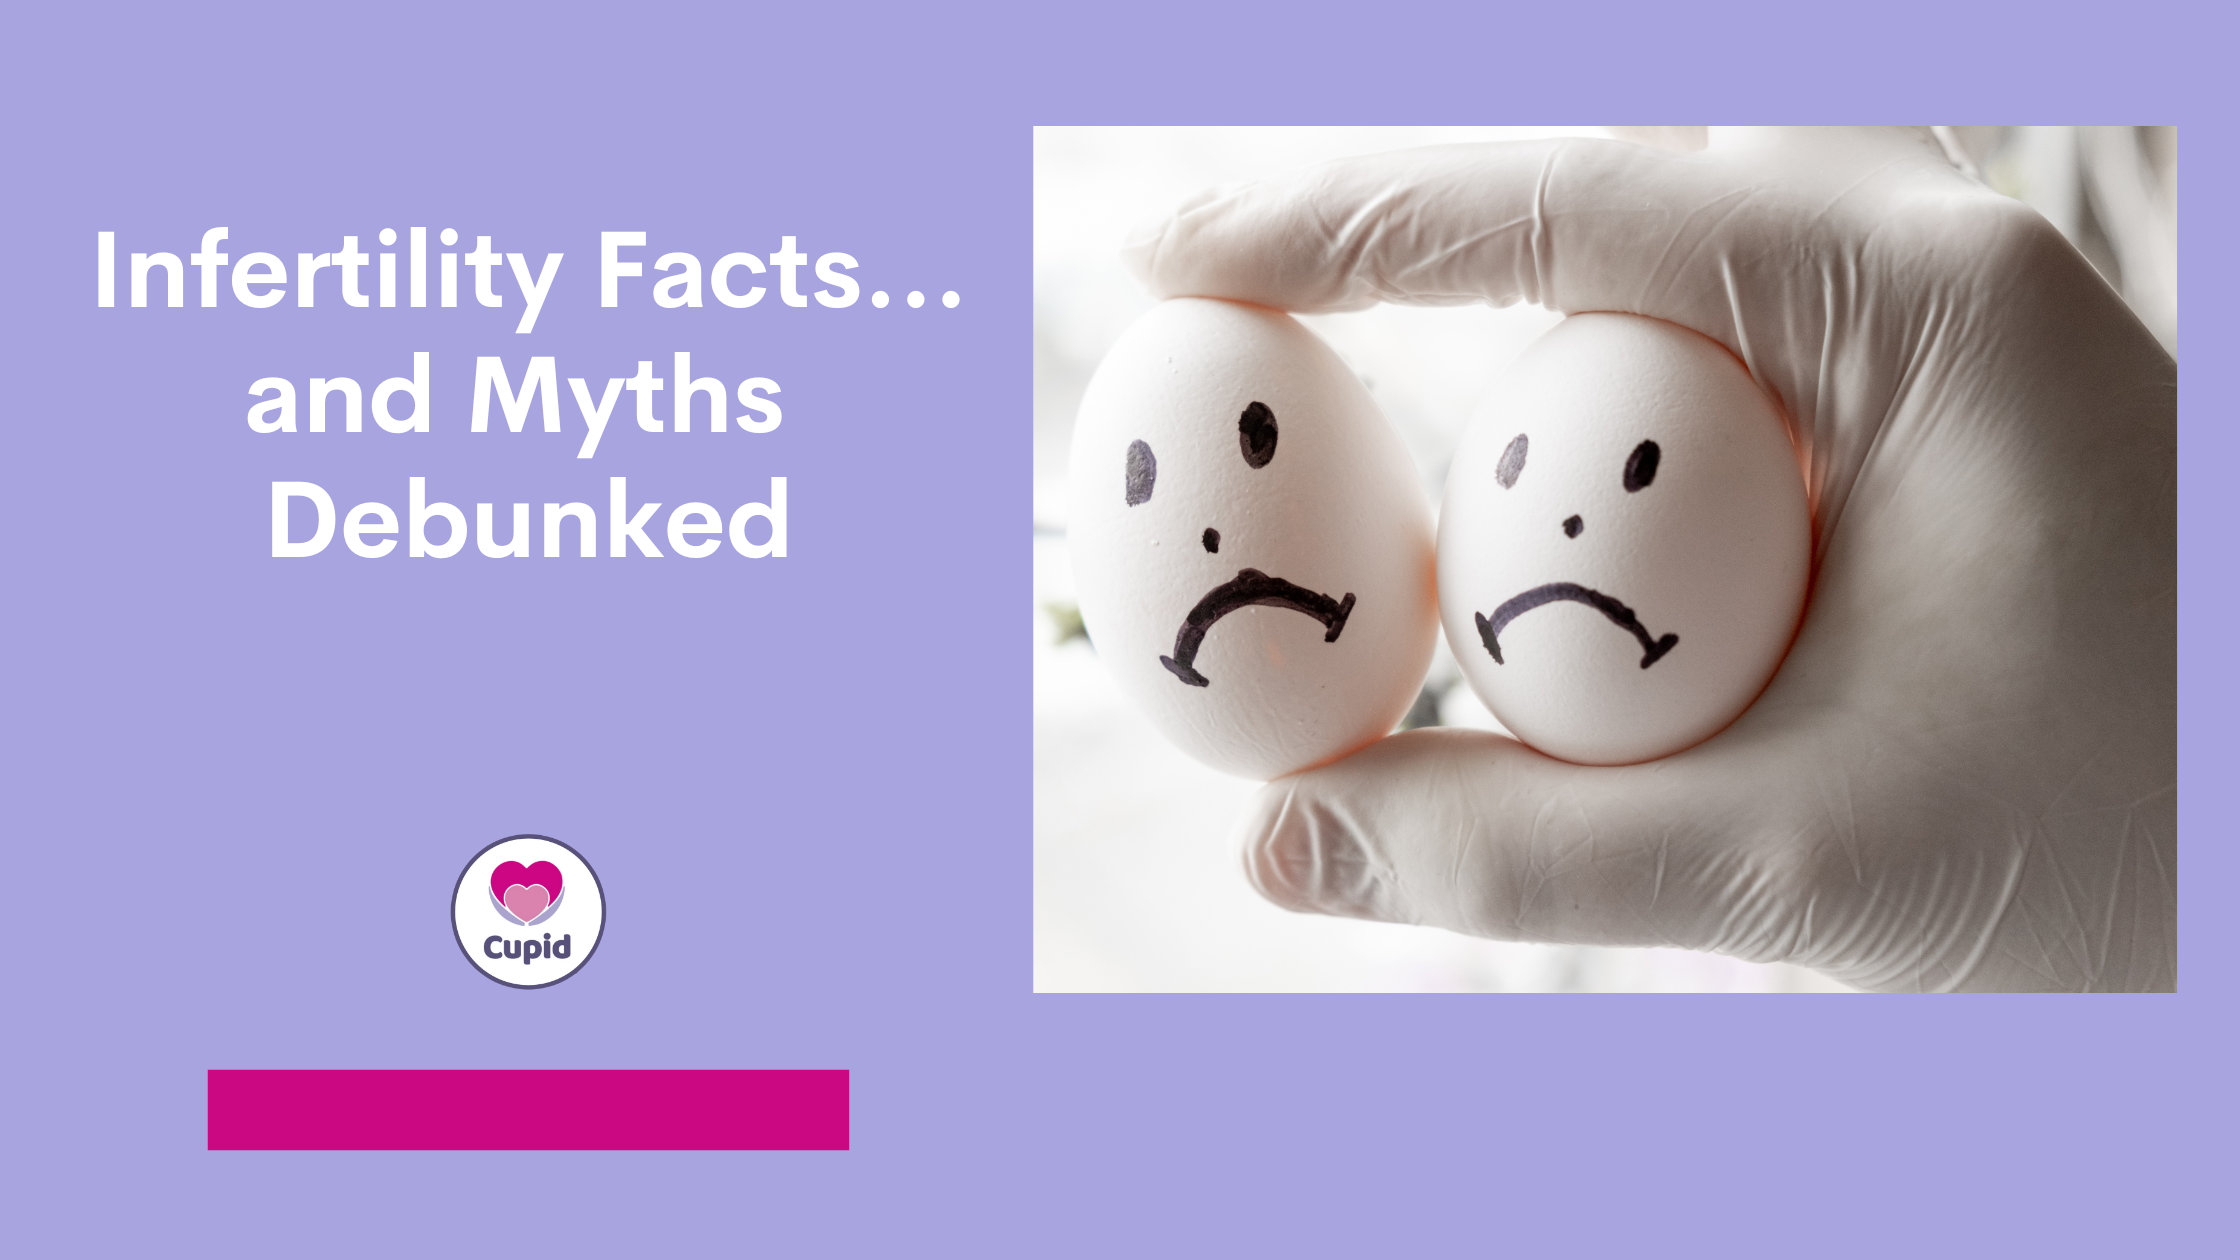 Infertility Facts and Myths Debunked